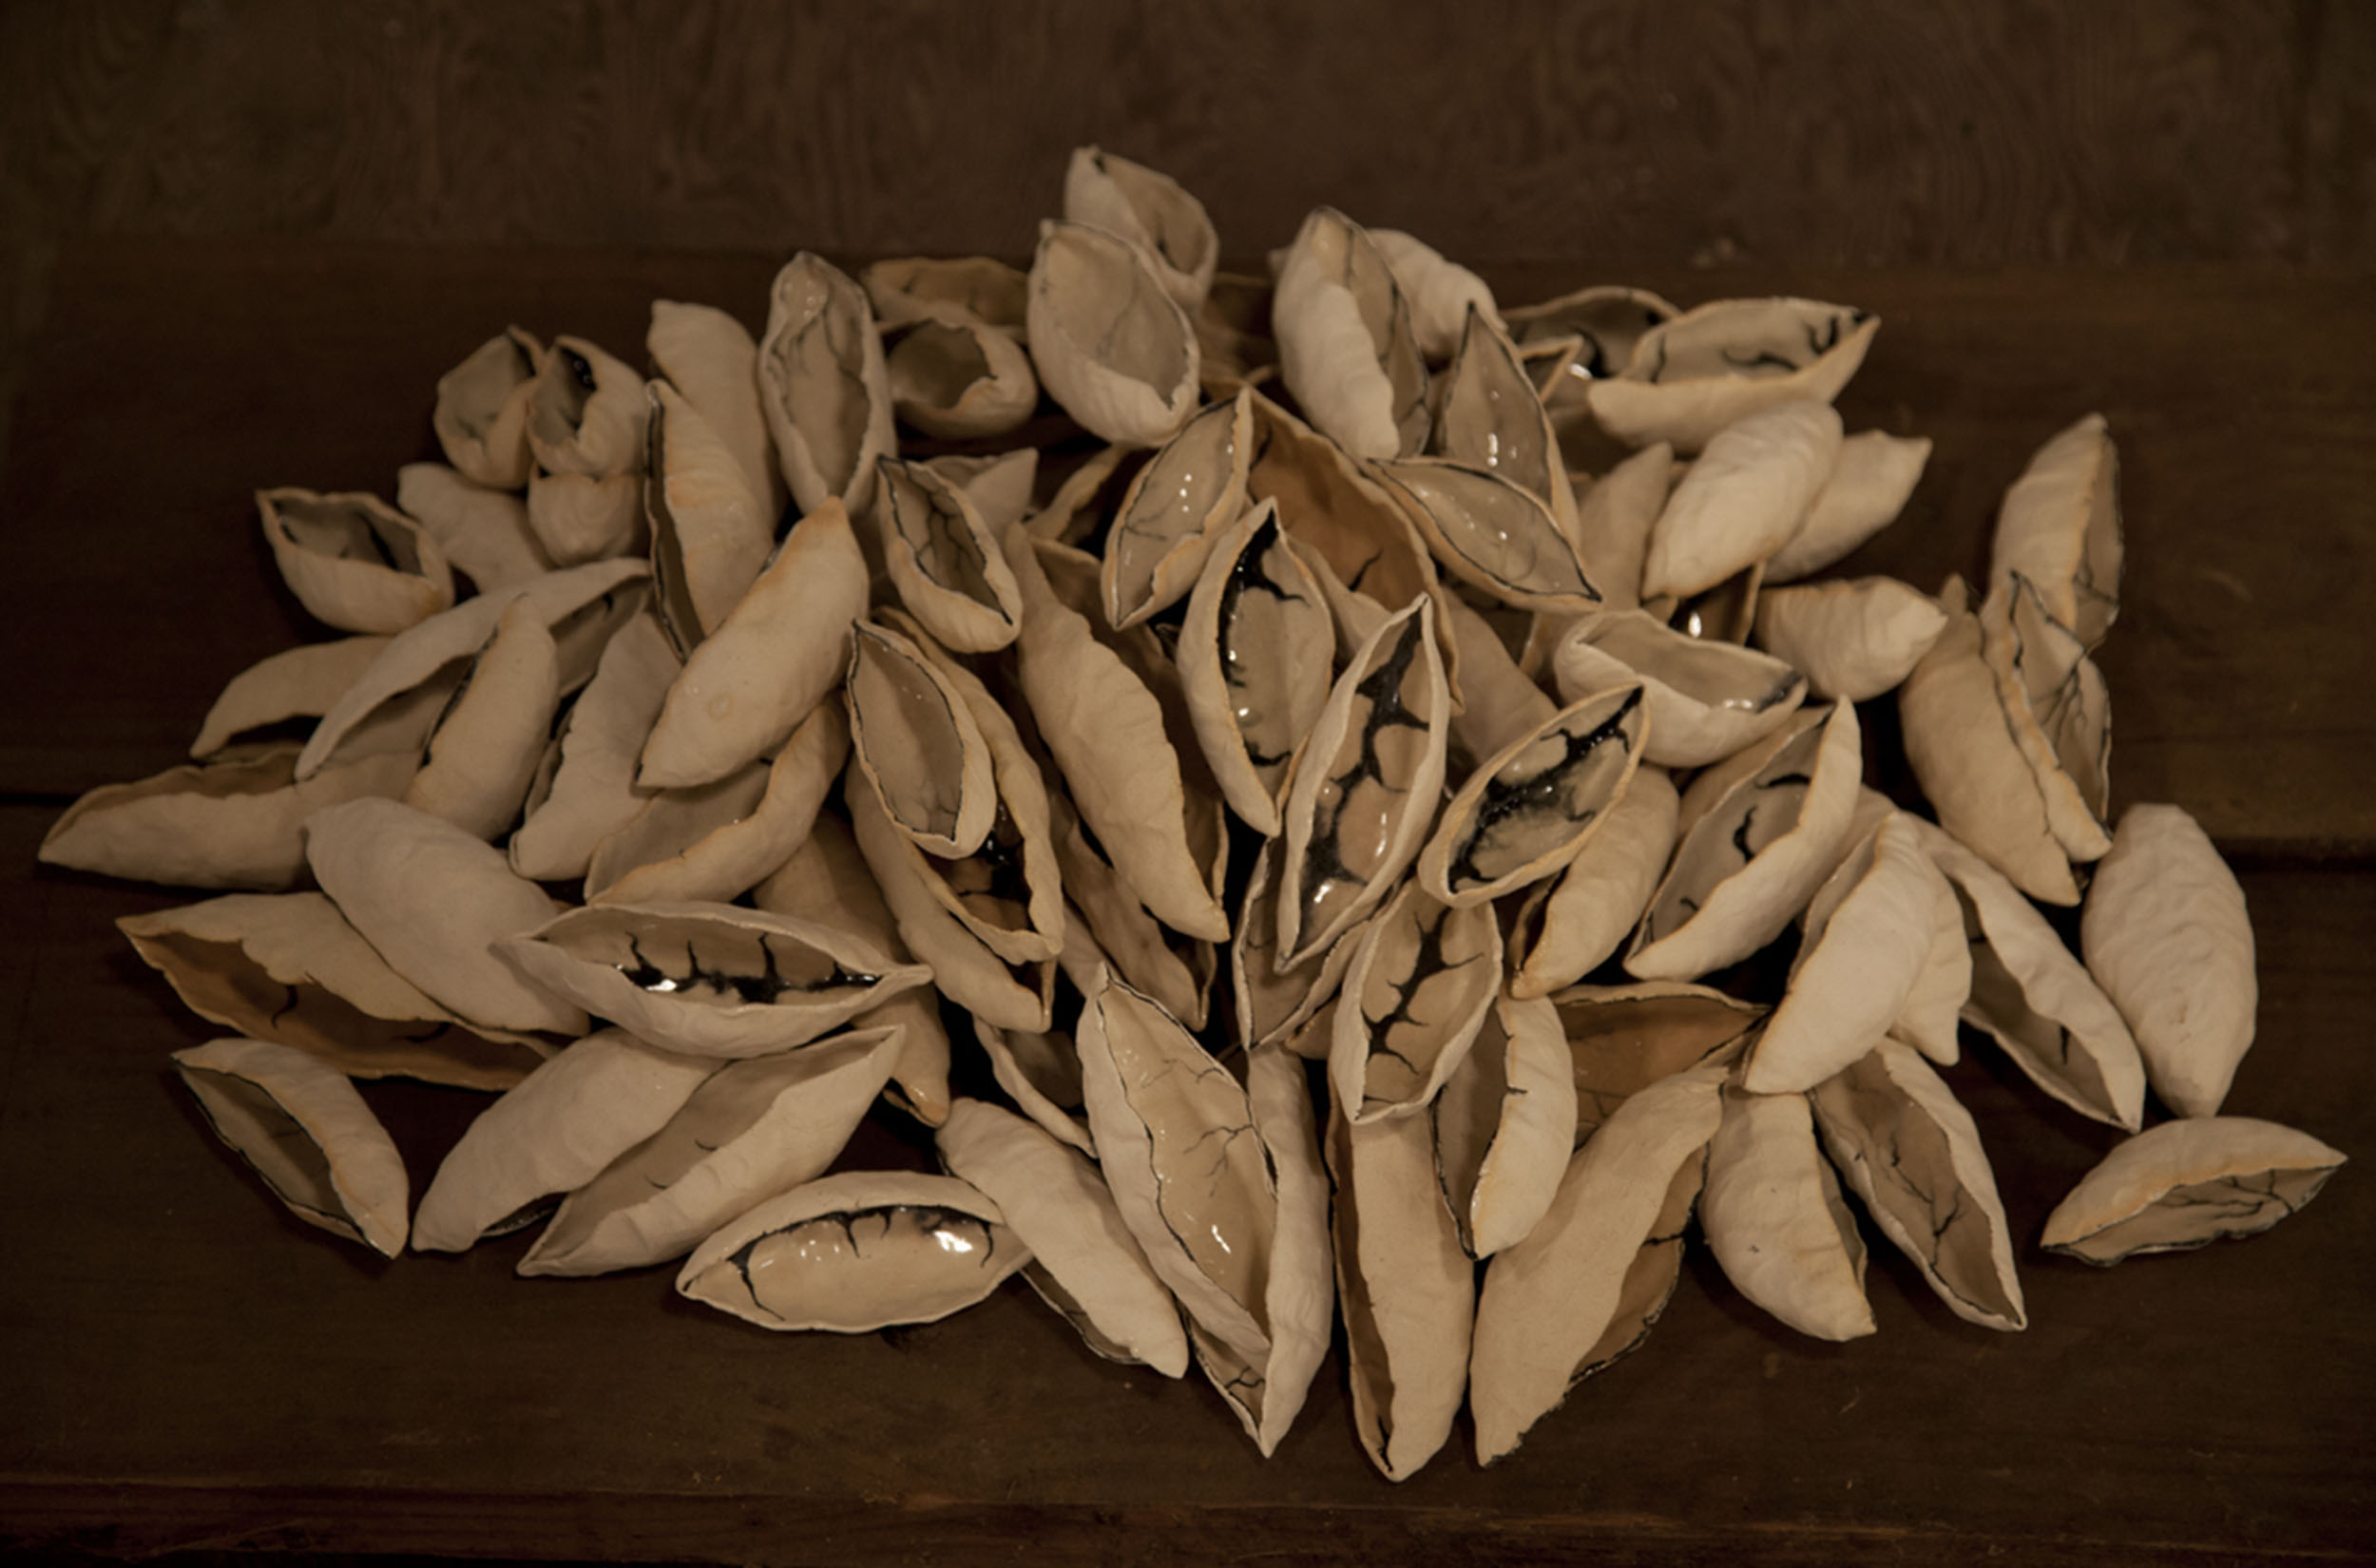 Ceramic depictions of seed pods in a large pile.